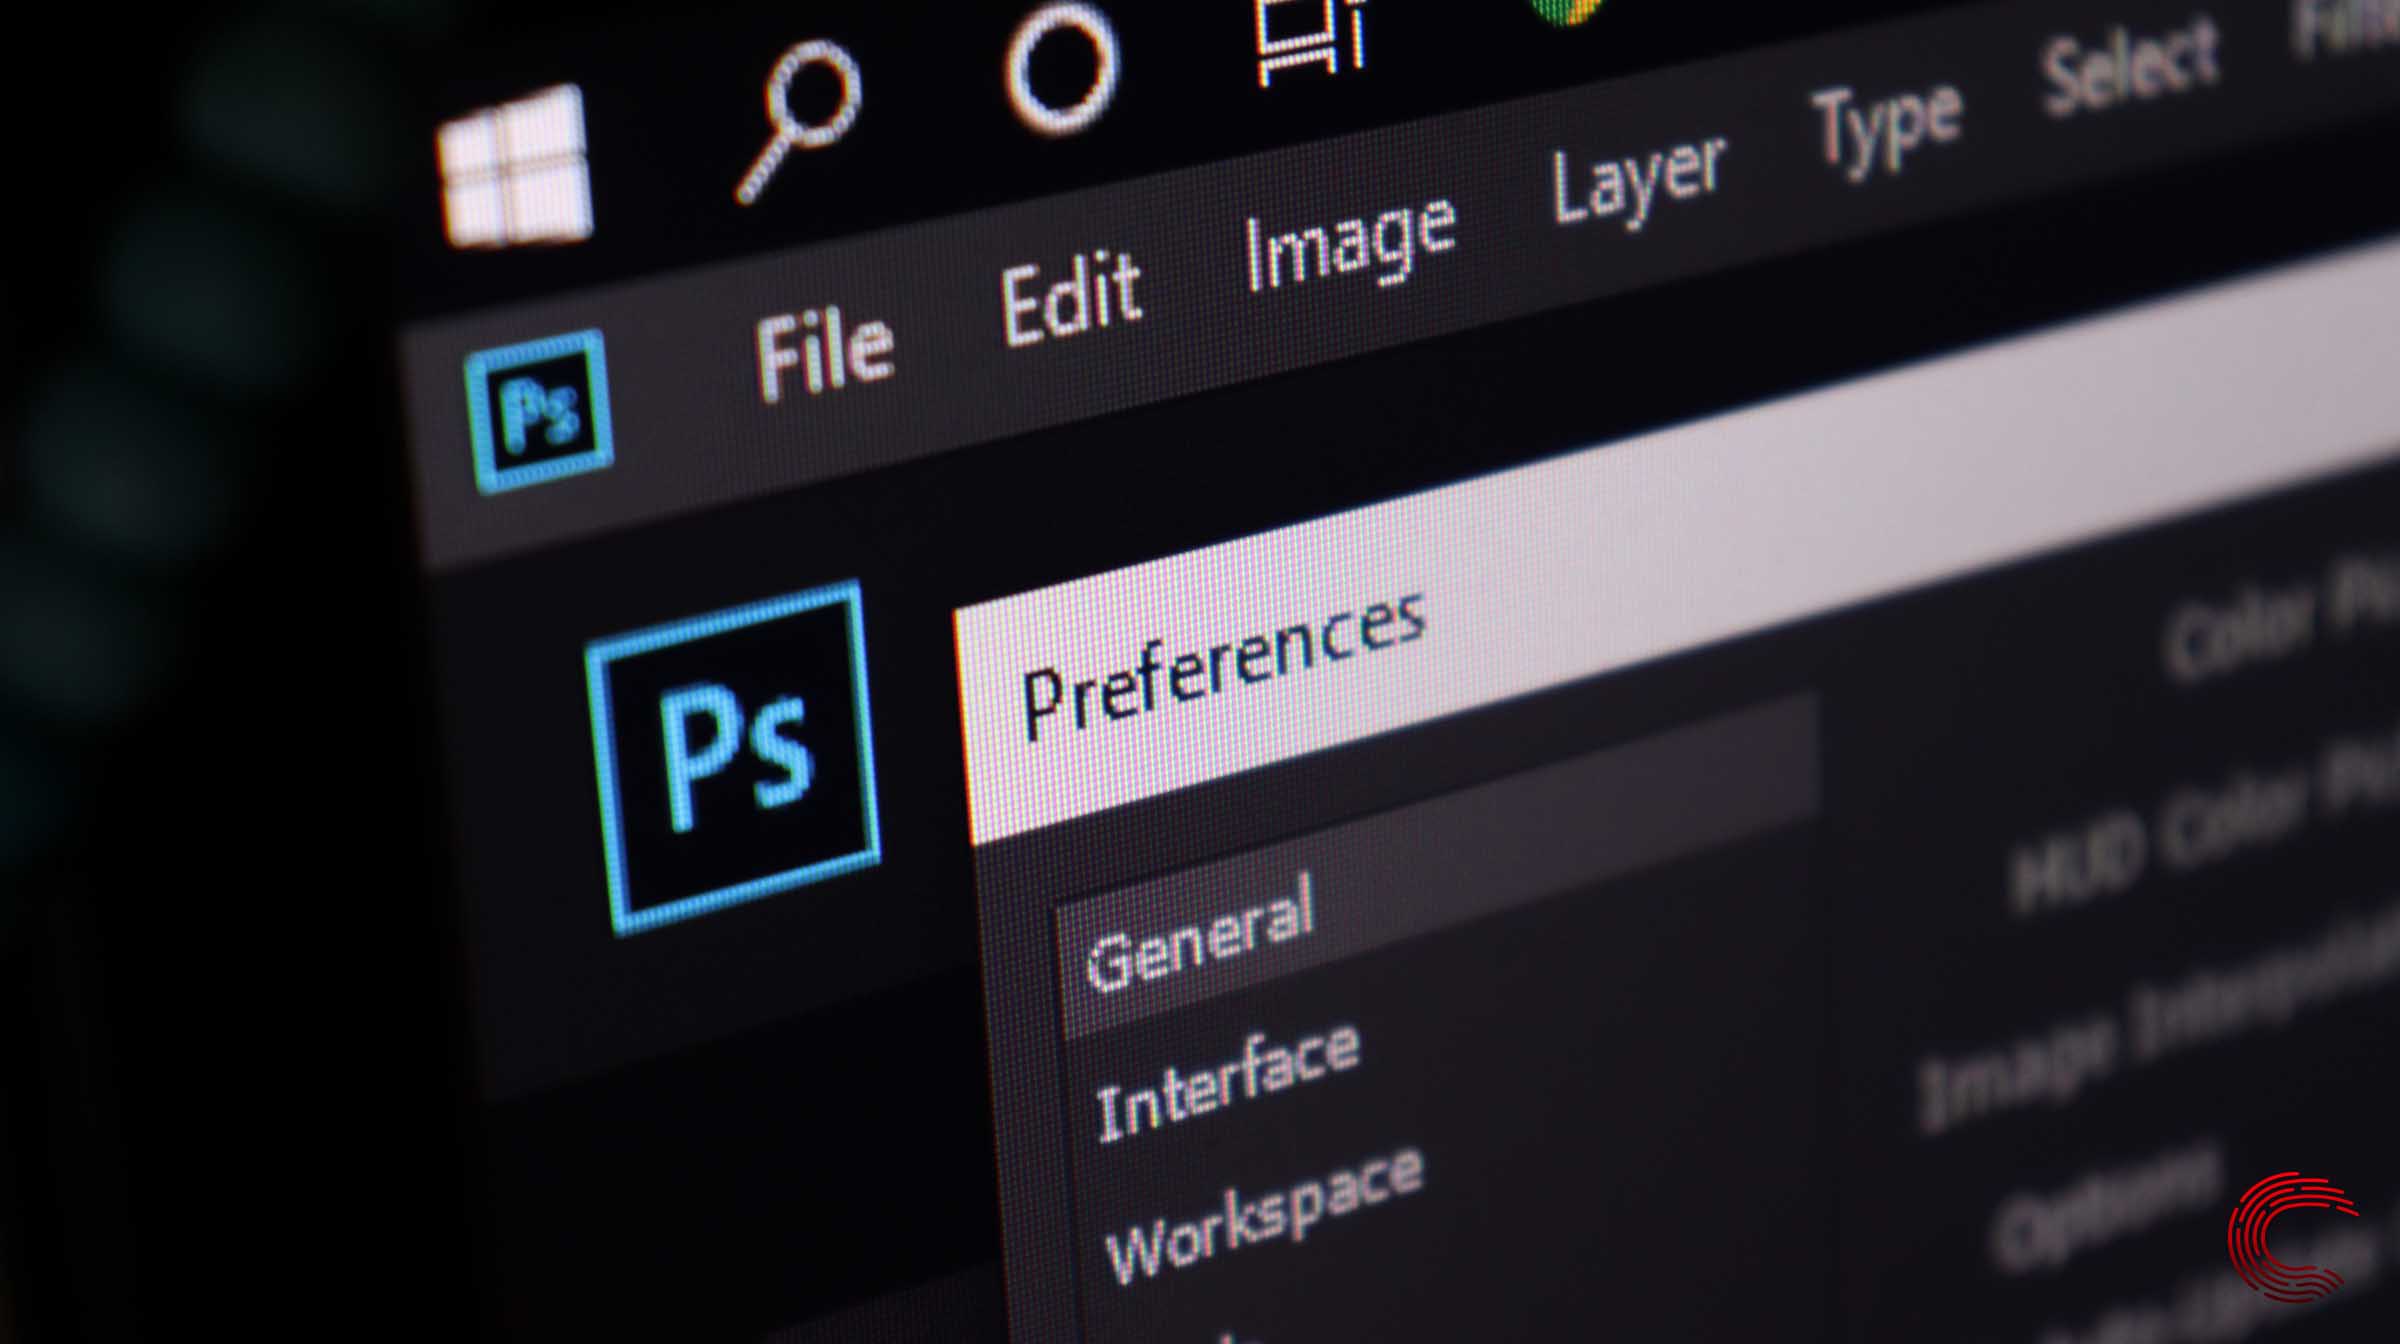 How to reset preferences in Photoshop?